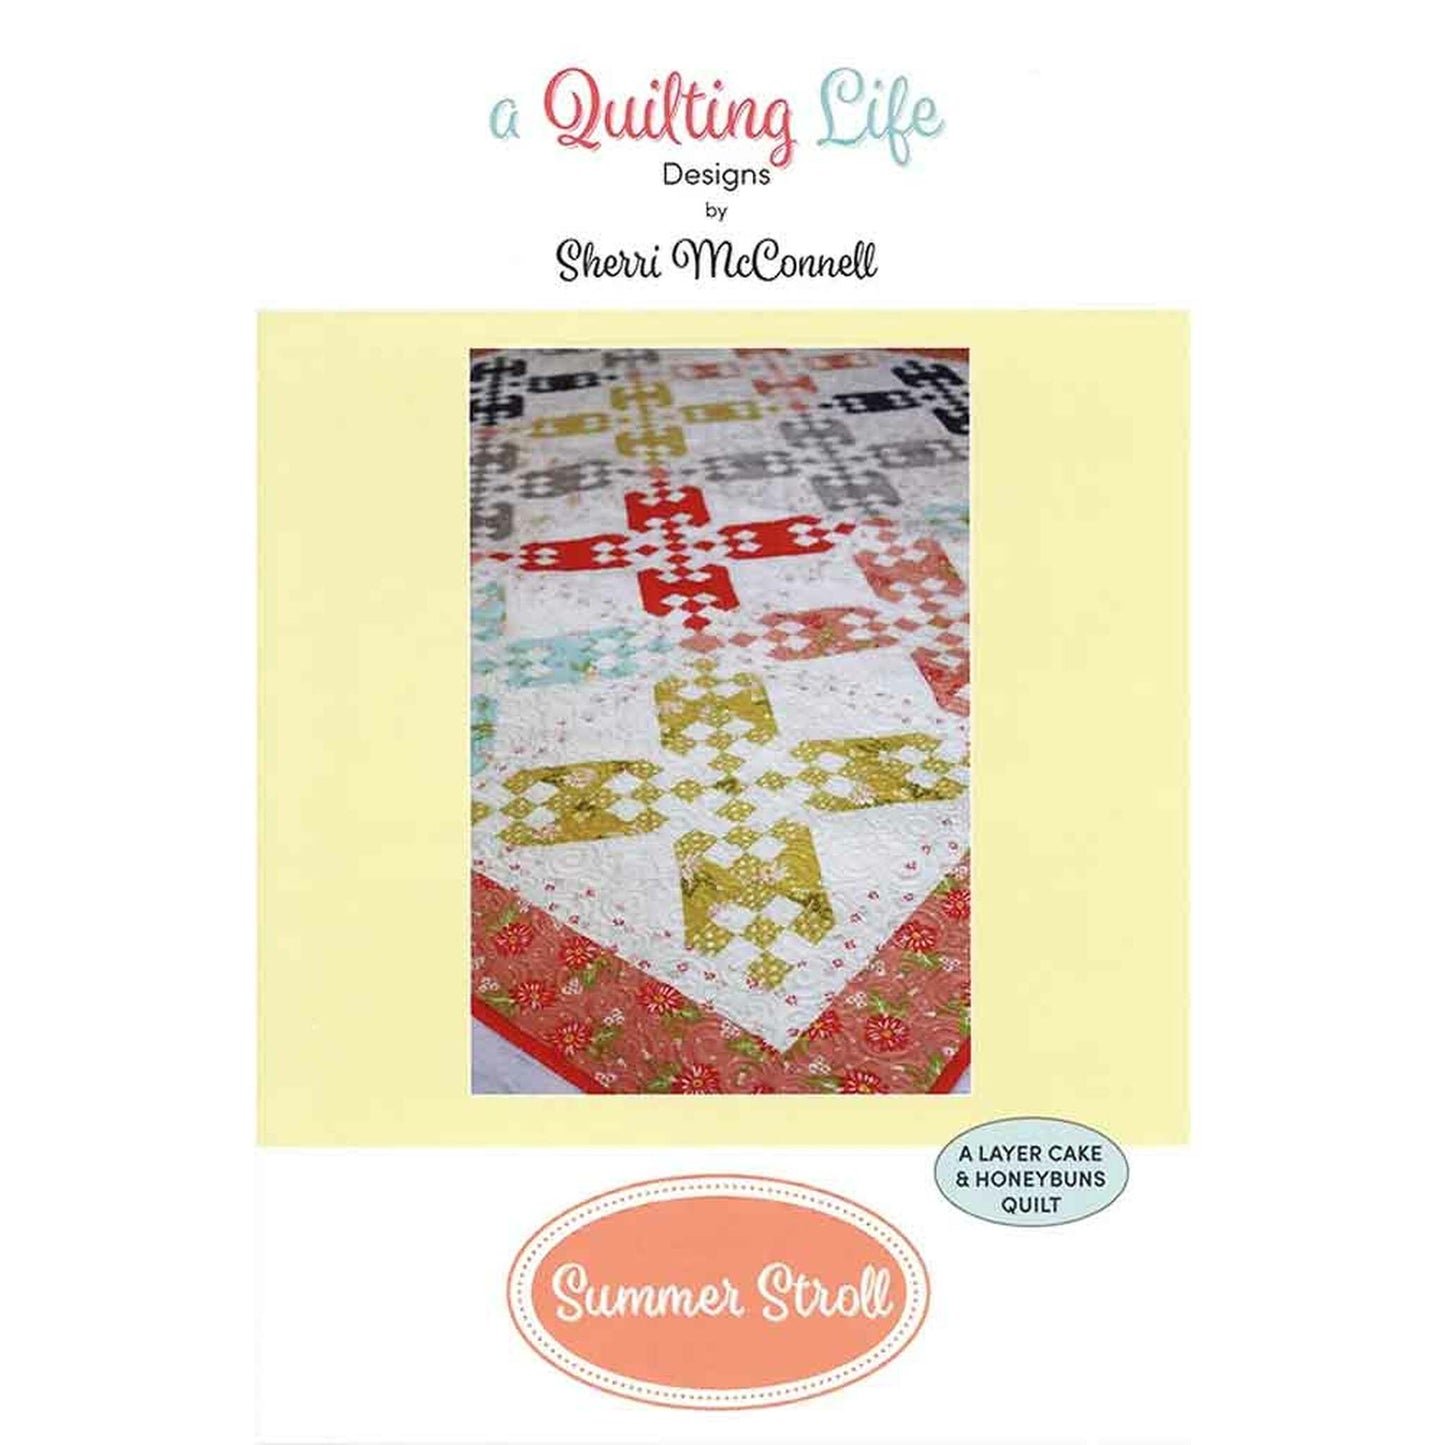 SUMMER STROLL BY QUILTING LIFE DESIGNS